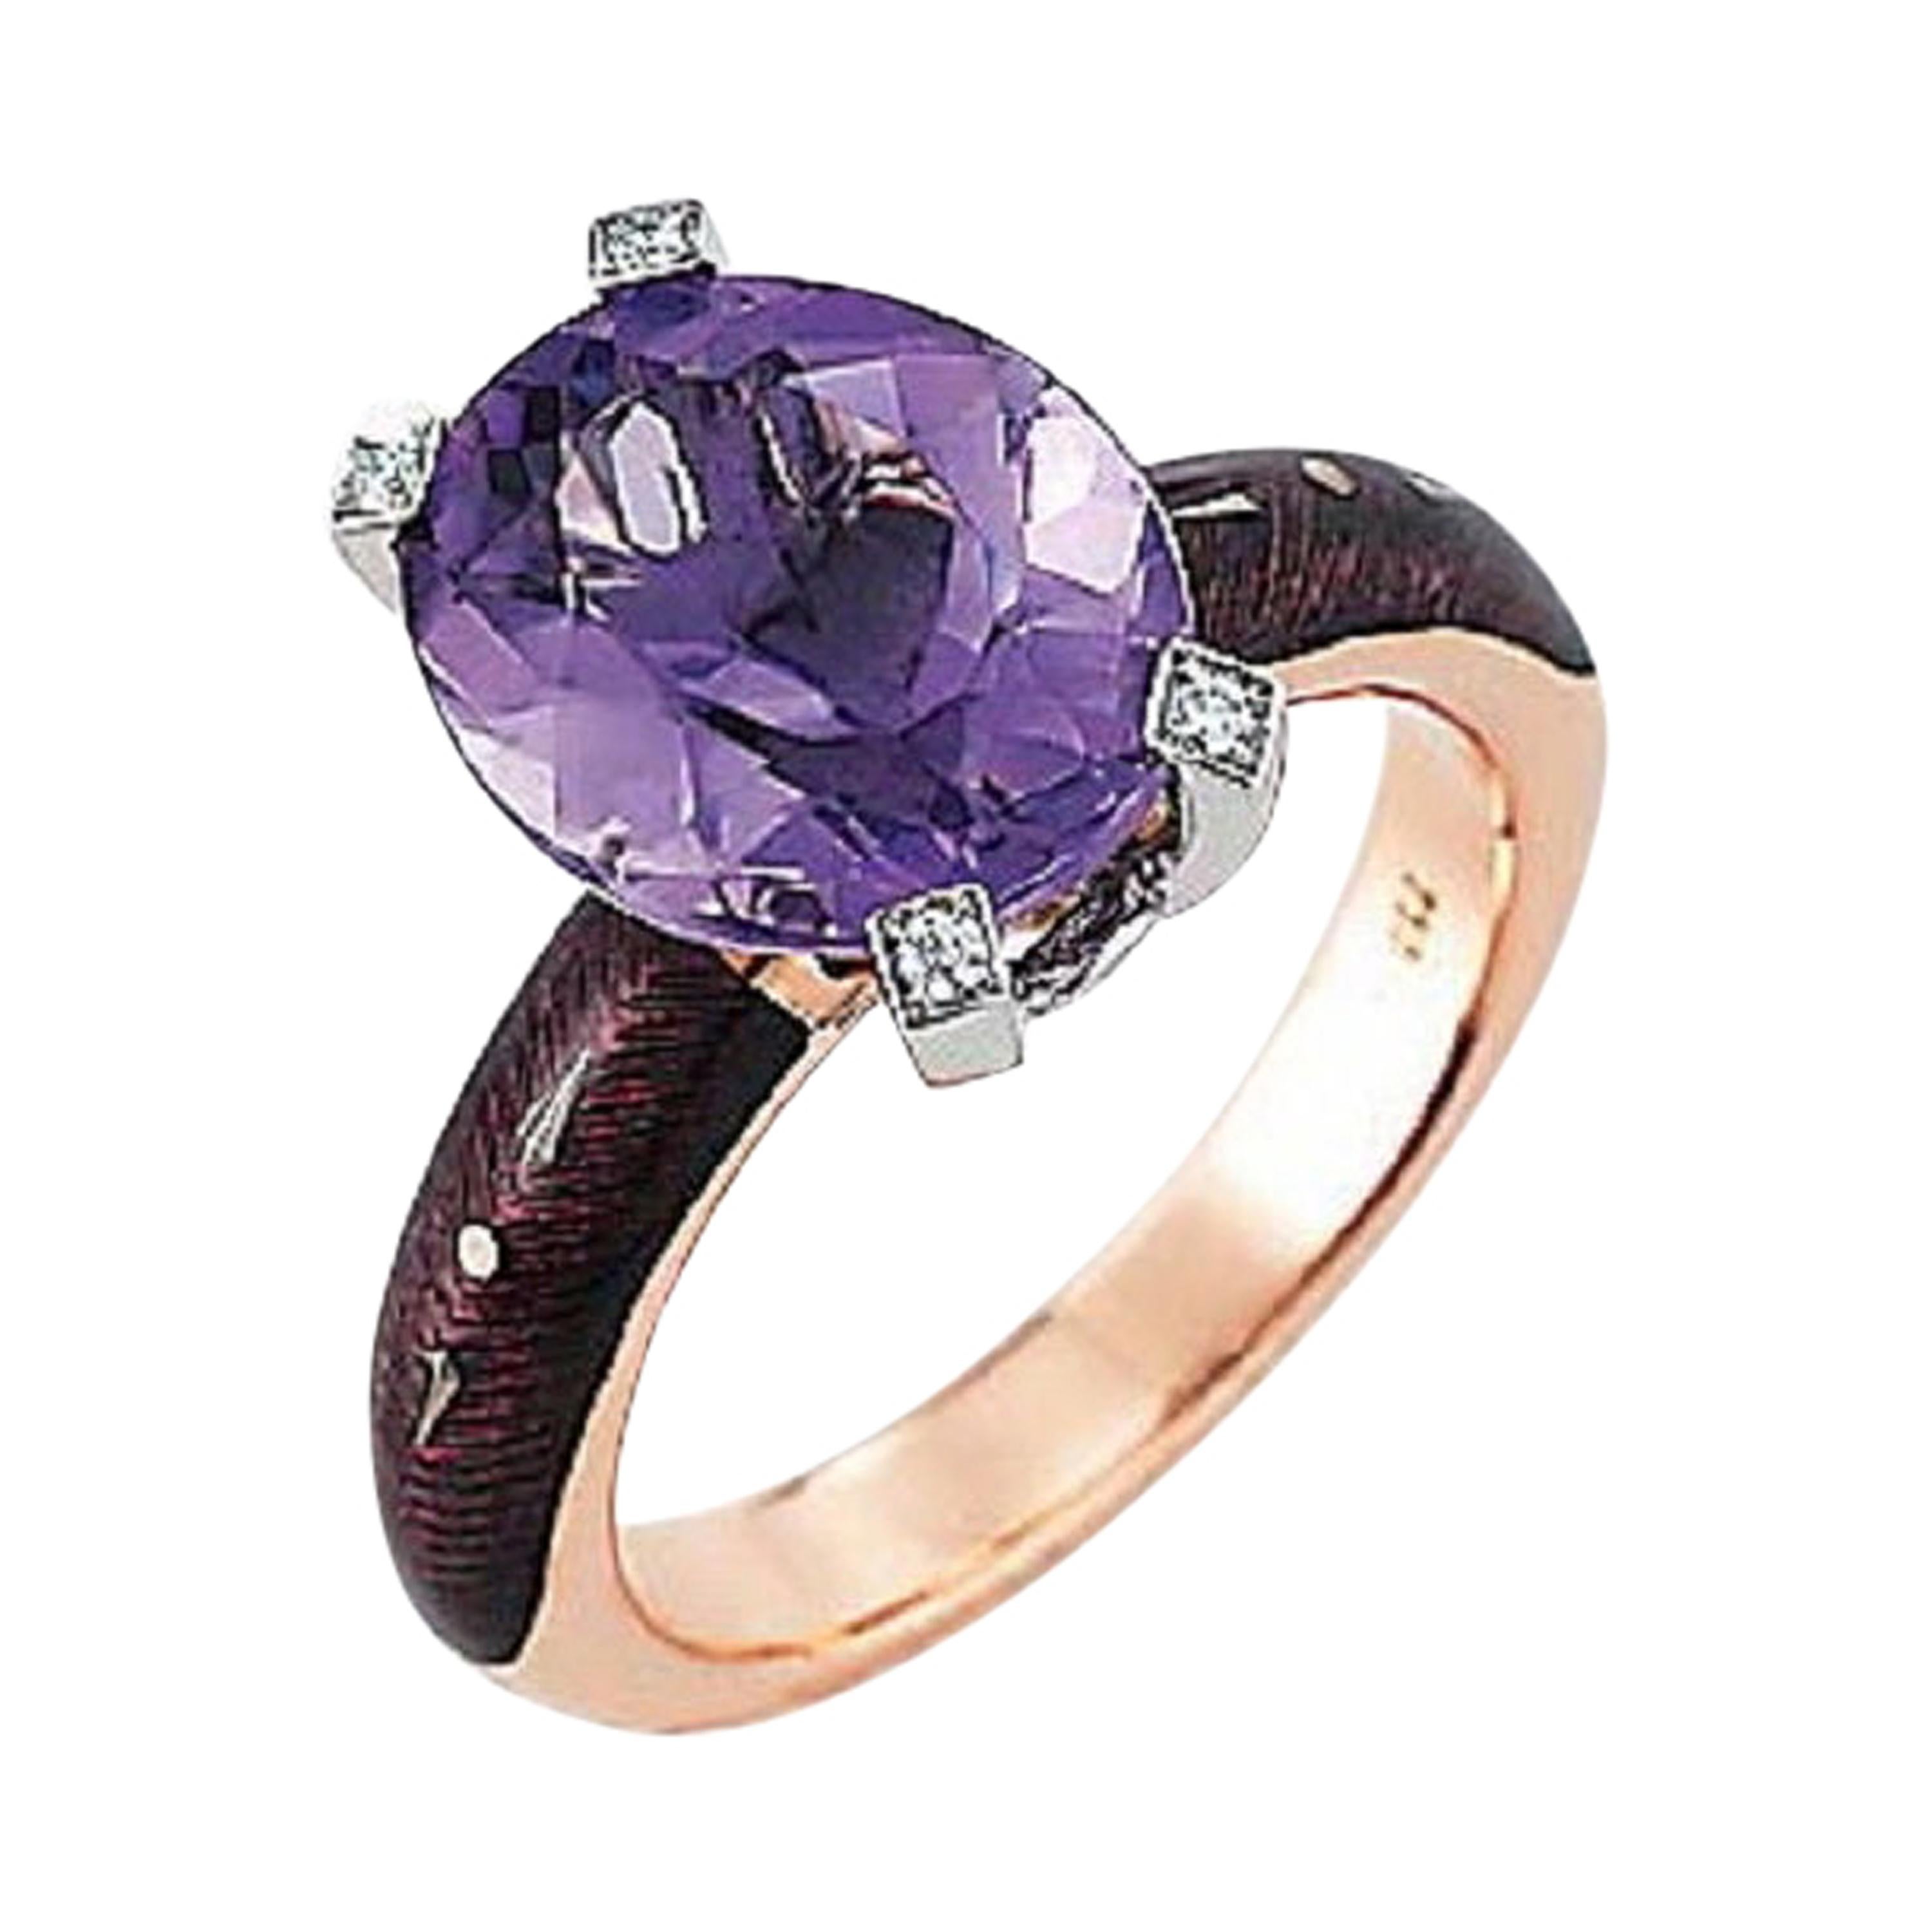 Victor Mayer Cocktail Lilac Enamel Ring 18k Rose / White Gold Amethyst Diamonds For Sale